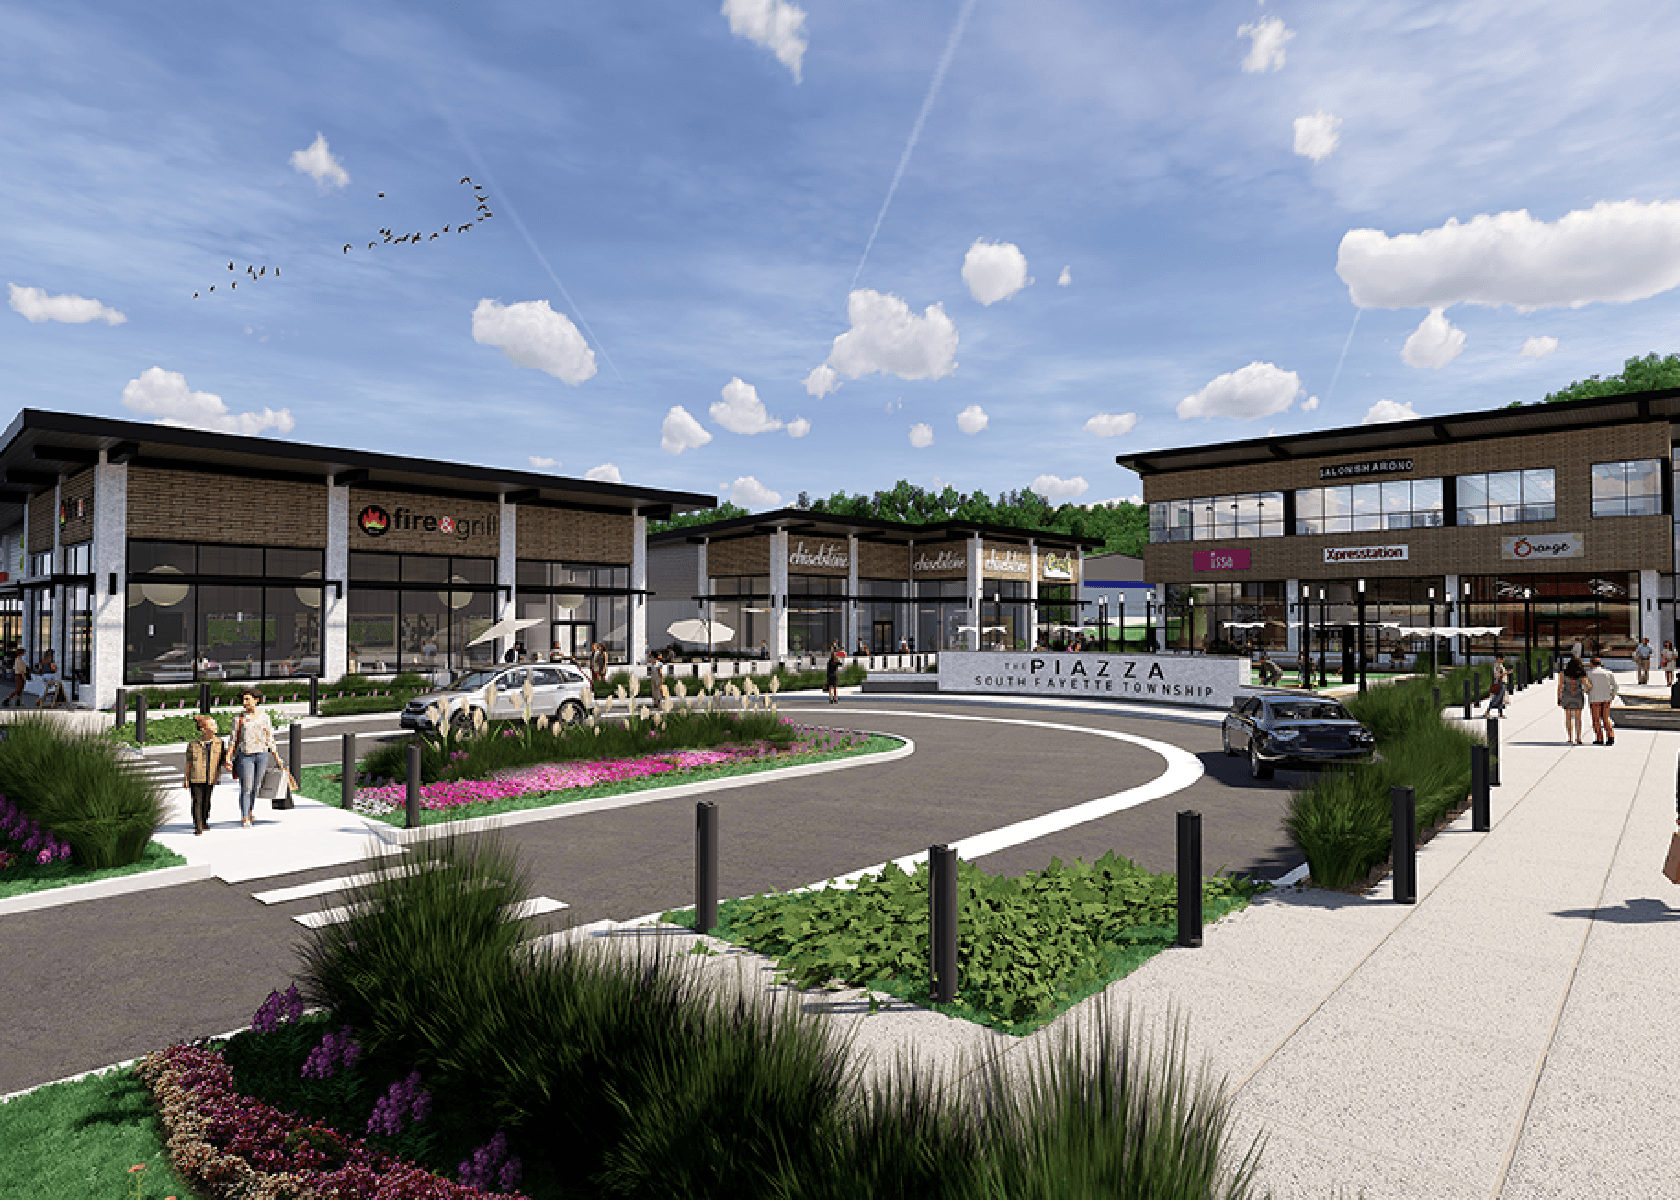 Digital rendering of the Piazza shopping plaza with the center's sign that reads: The Piazza, South Fayette Township